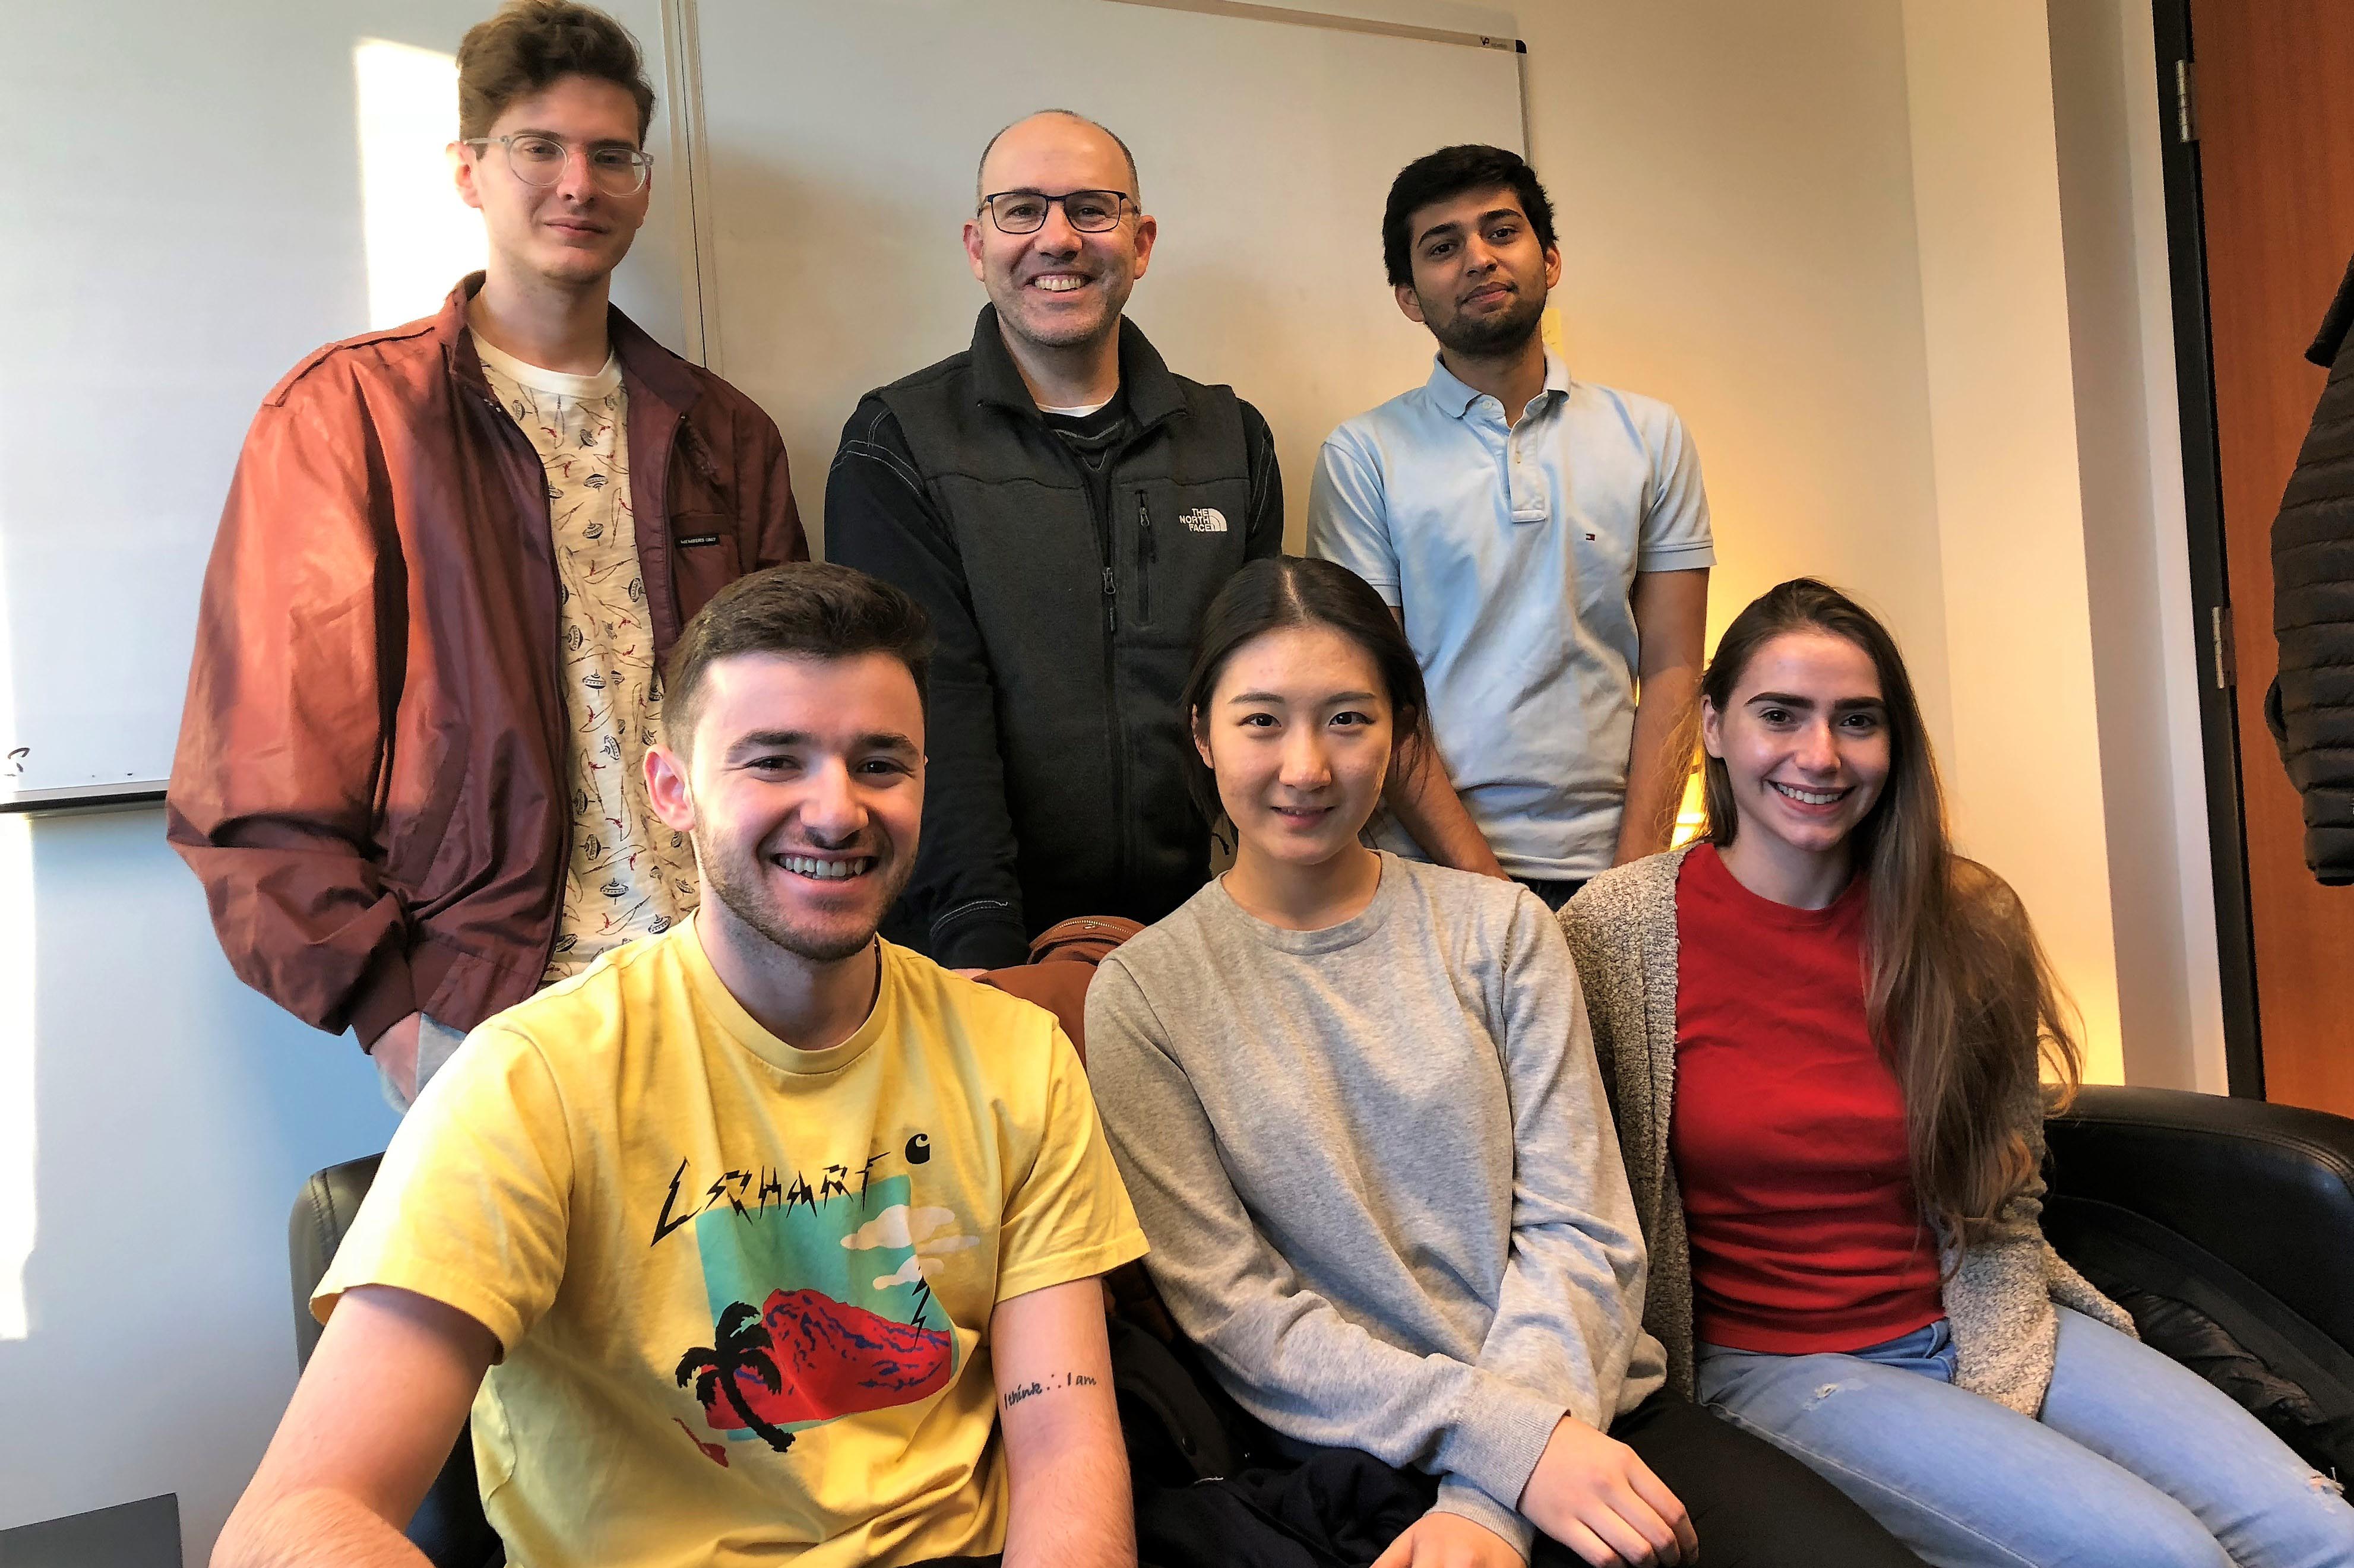 Professor Andy Molinsky with members of his student podcast team, including Kevin Dikdan '20, Manas Maniar '19,Jordan Brodie ‘19, Yuechen Ta '21 and Ali Carney '19.